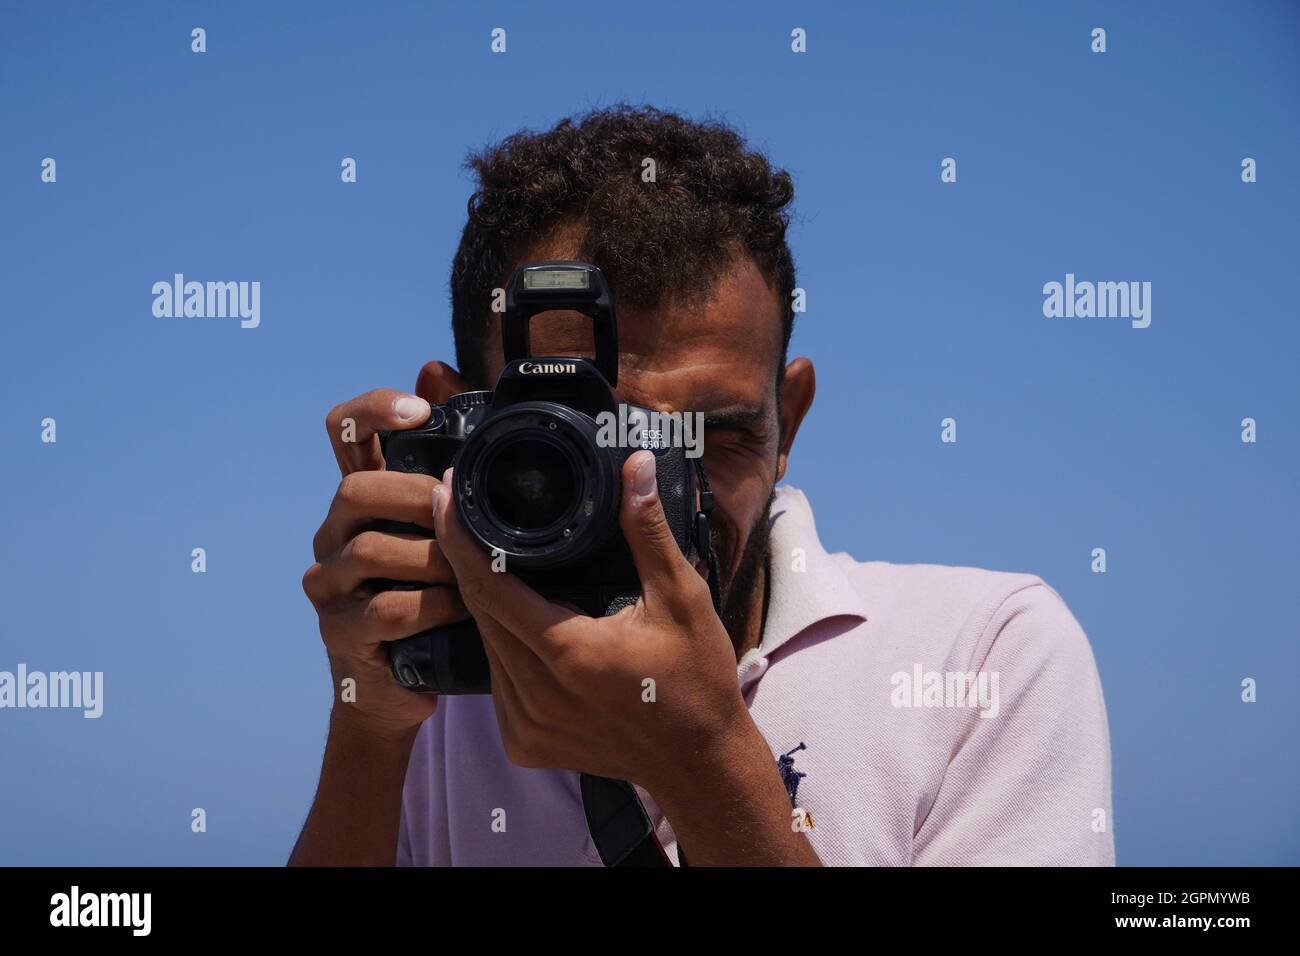 MARSA ALAM, EGYPT - September 25, 2021. Portrait of smiling Arabic man Holding photo Camera on clear blue sky background. Photographing tourists durin Stock Photo